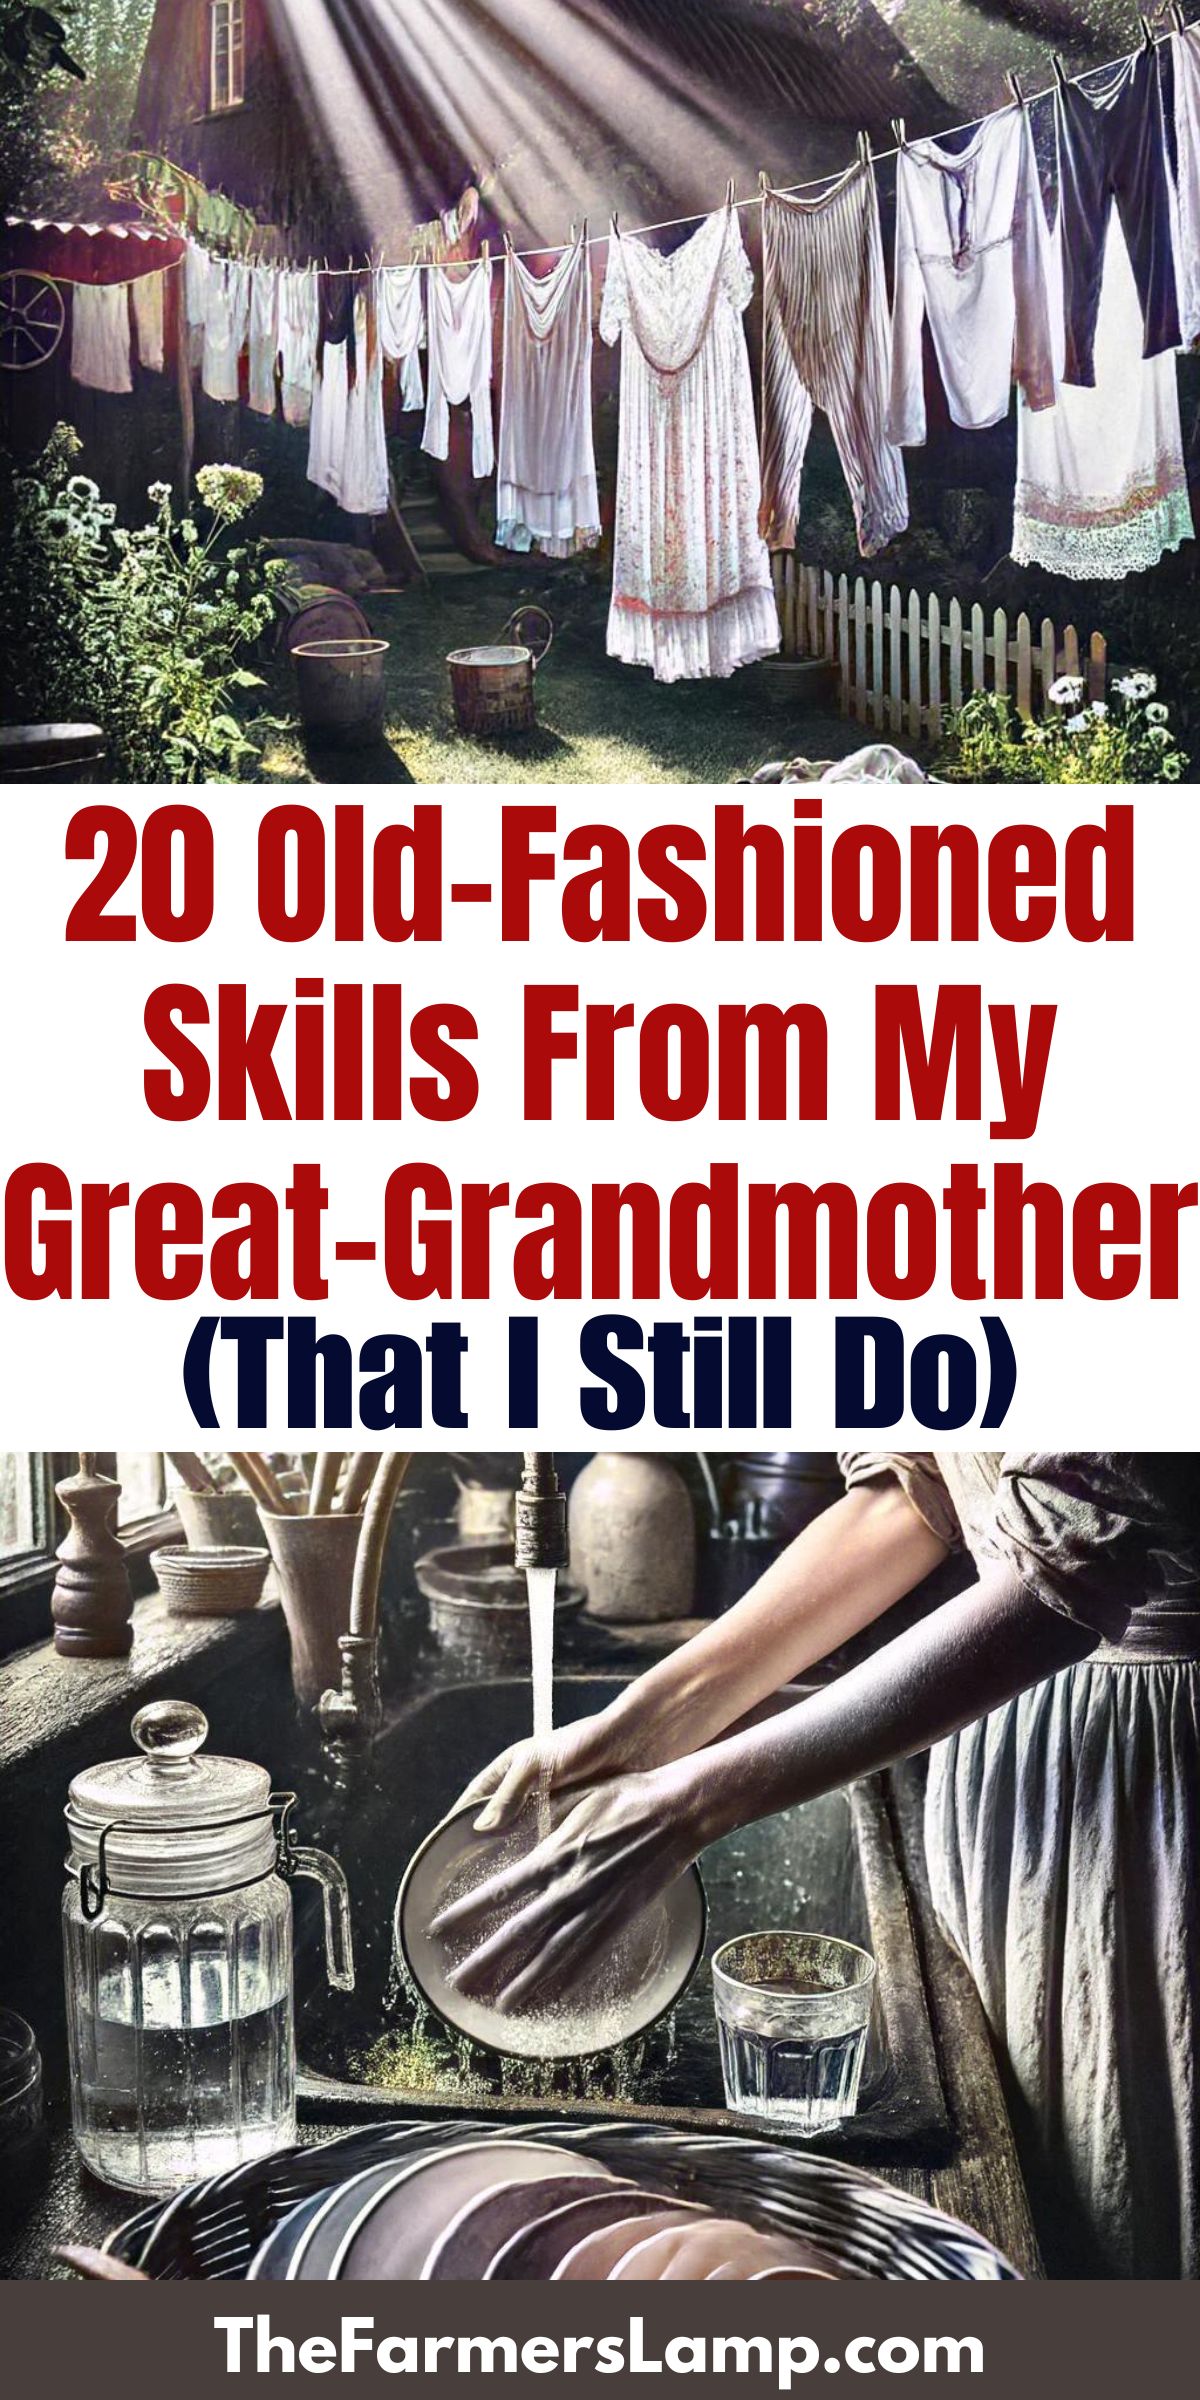 clothes drying on a clothesline and a woman washing dishes by hand with words that read 20 old fashioned skills from my great grandmother that i still do the farmers lamp dot com